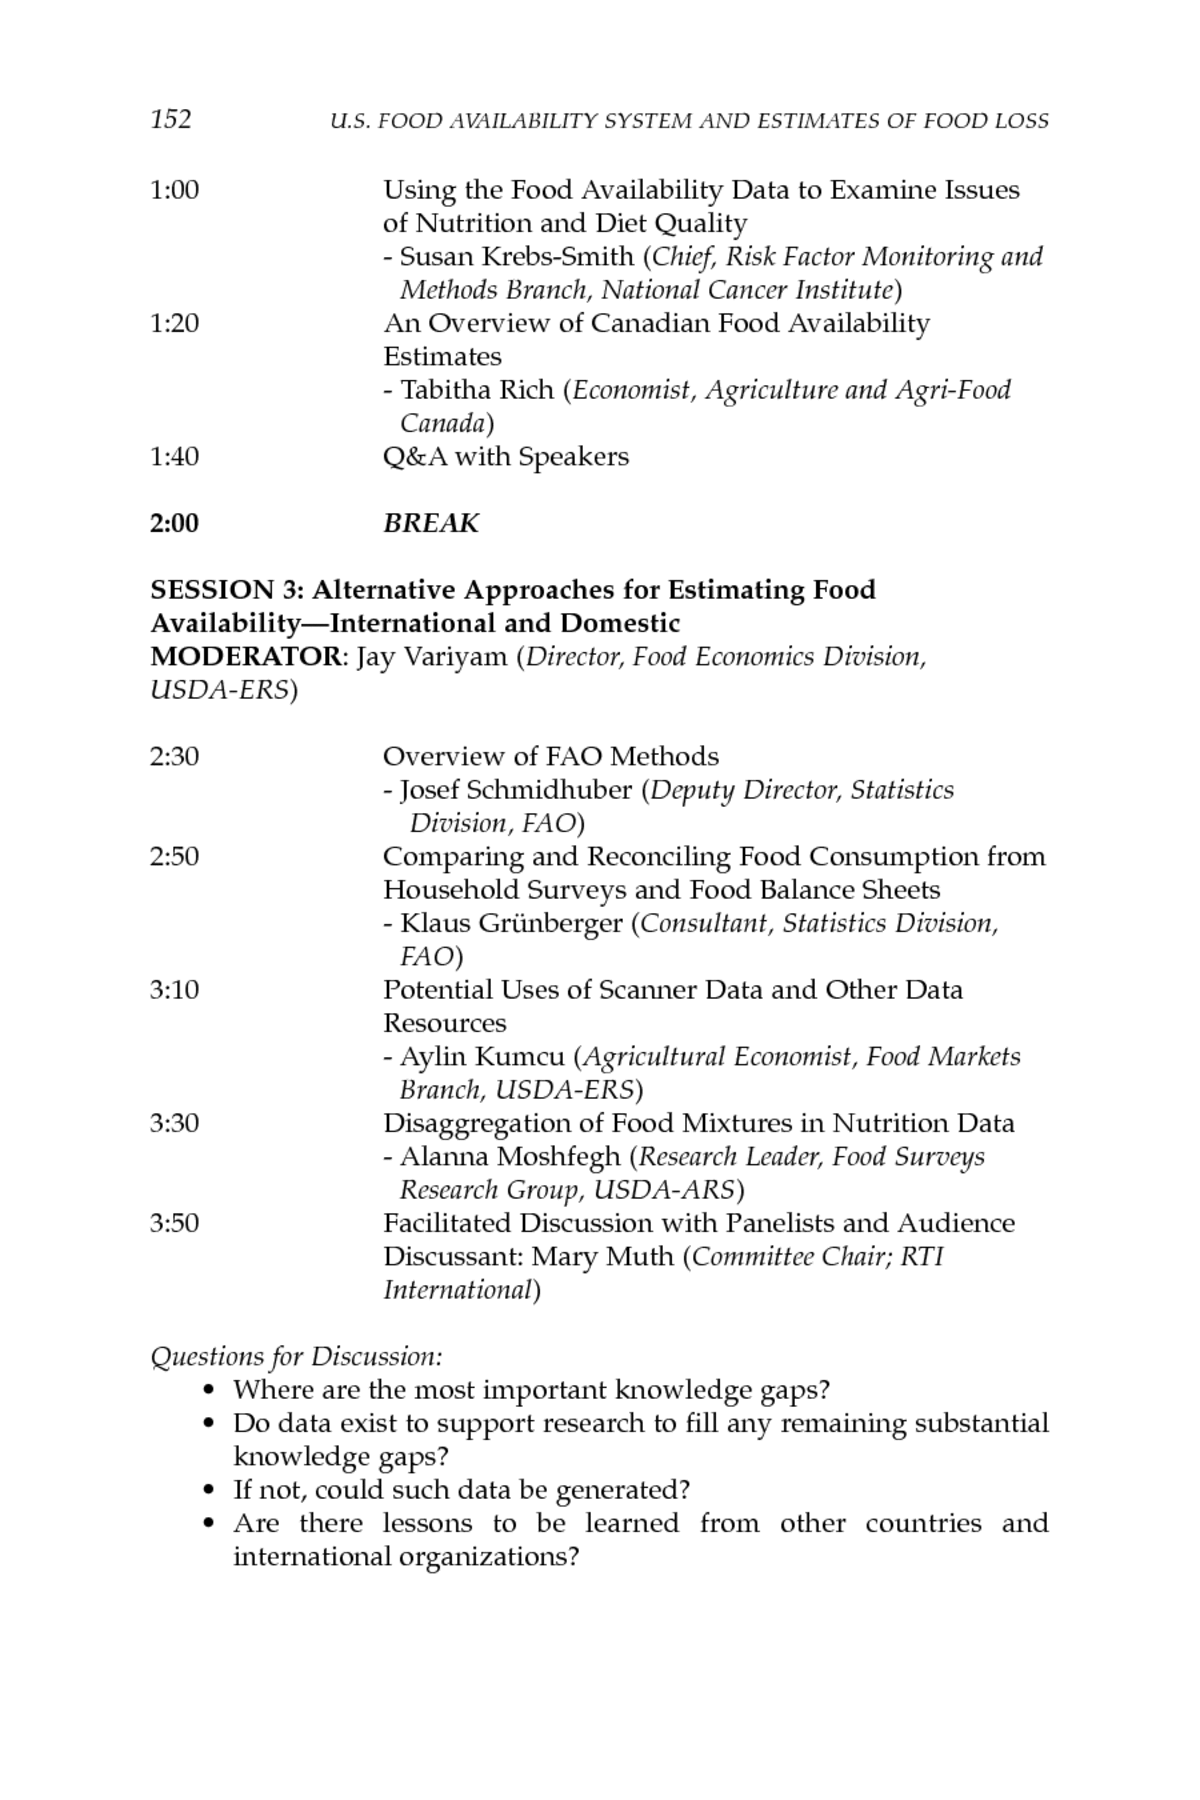 Appendix B: Agenda | Data and Research to Improve the U.S. Food